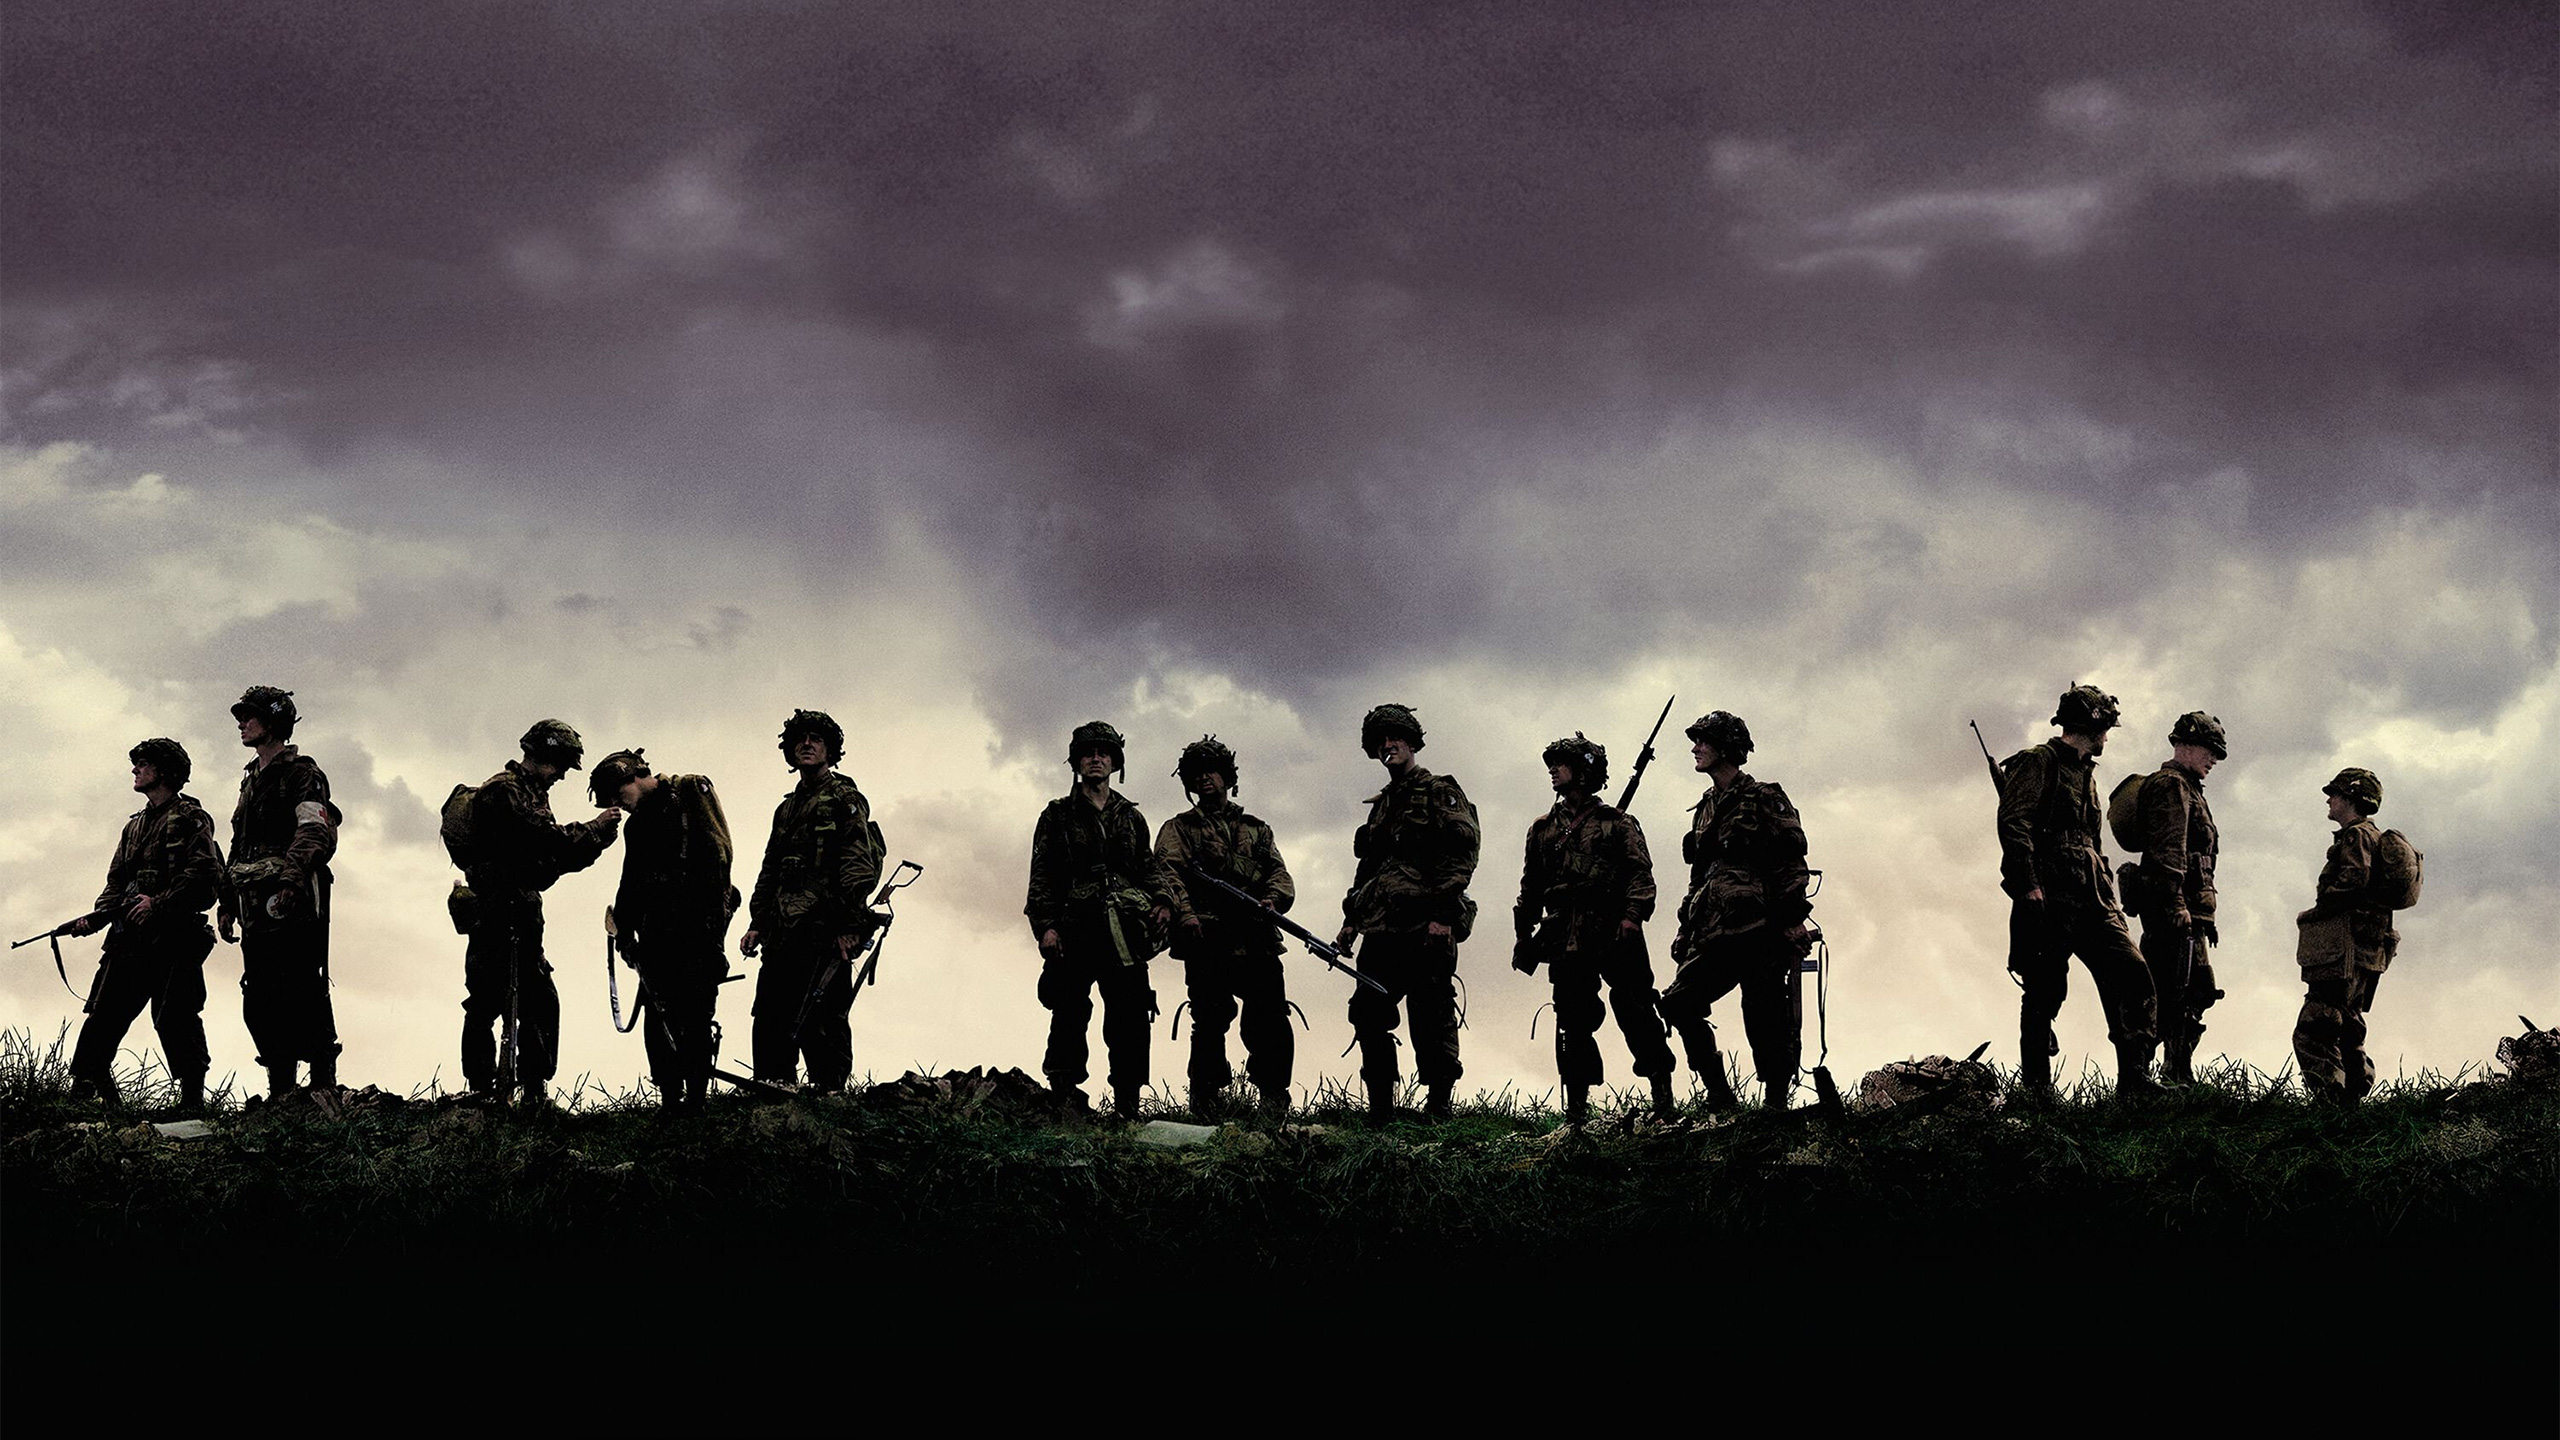 General 2560x1440 Band of Brothers World War II military army airborne HBO overcast TV series men soldier Promotional